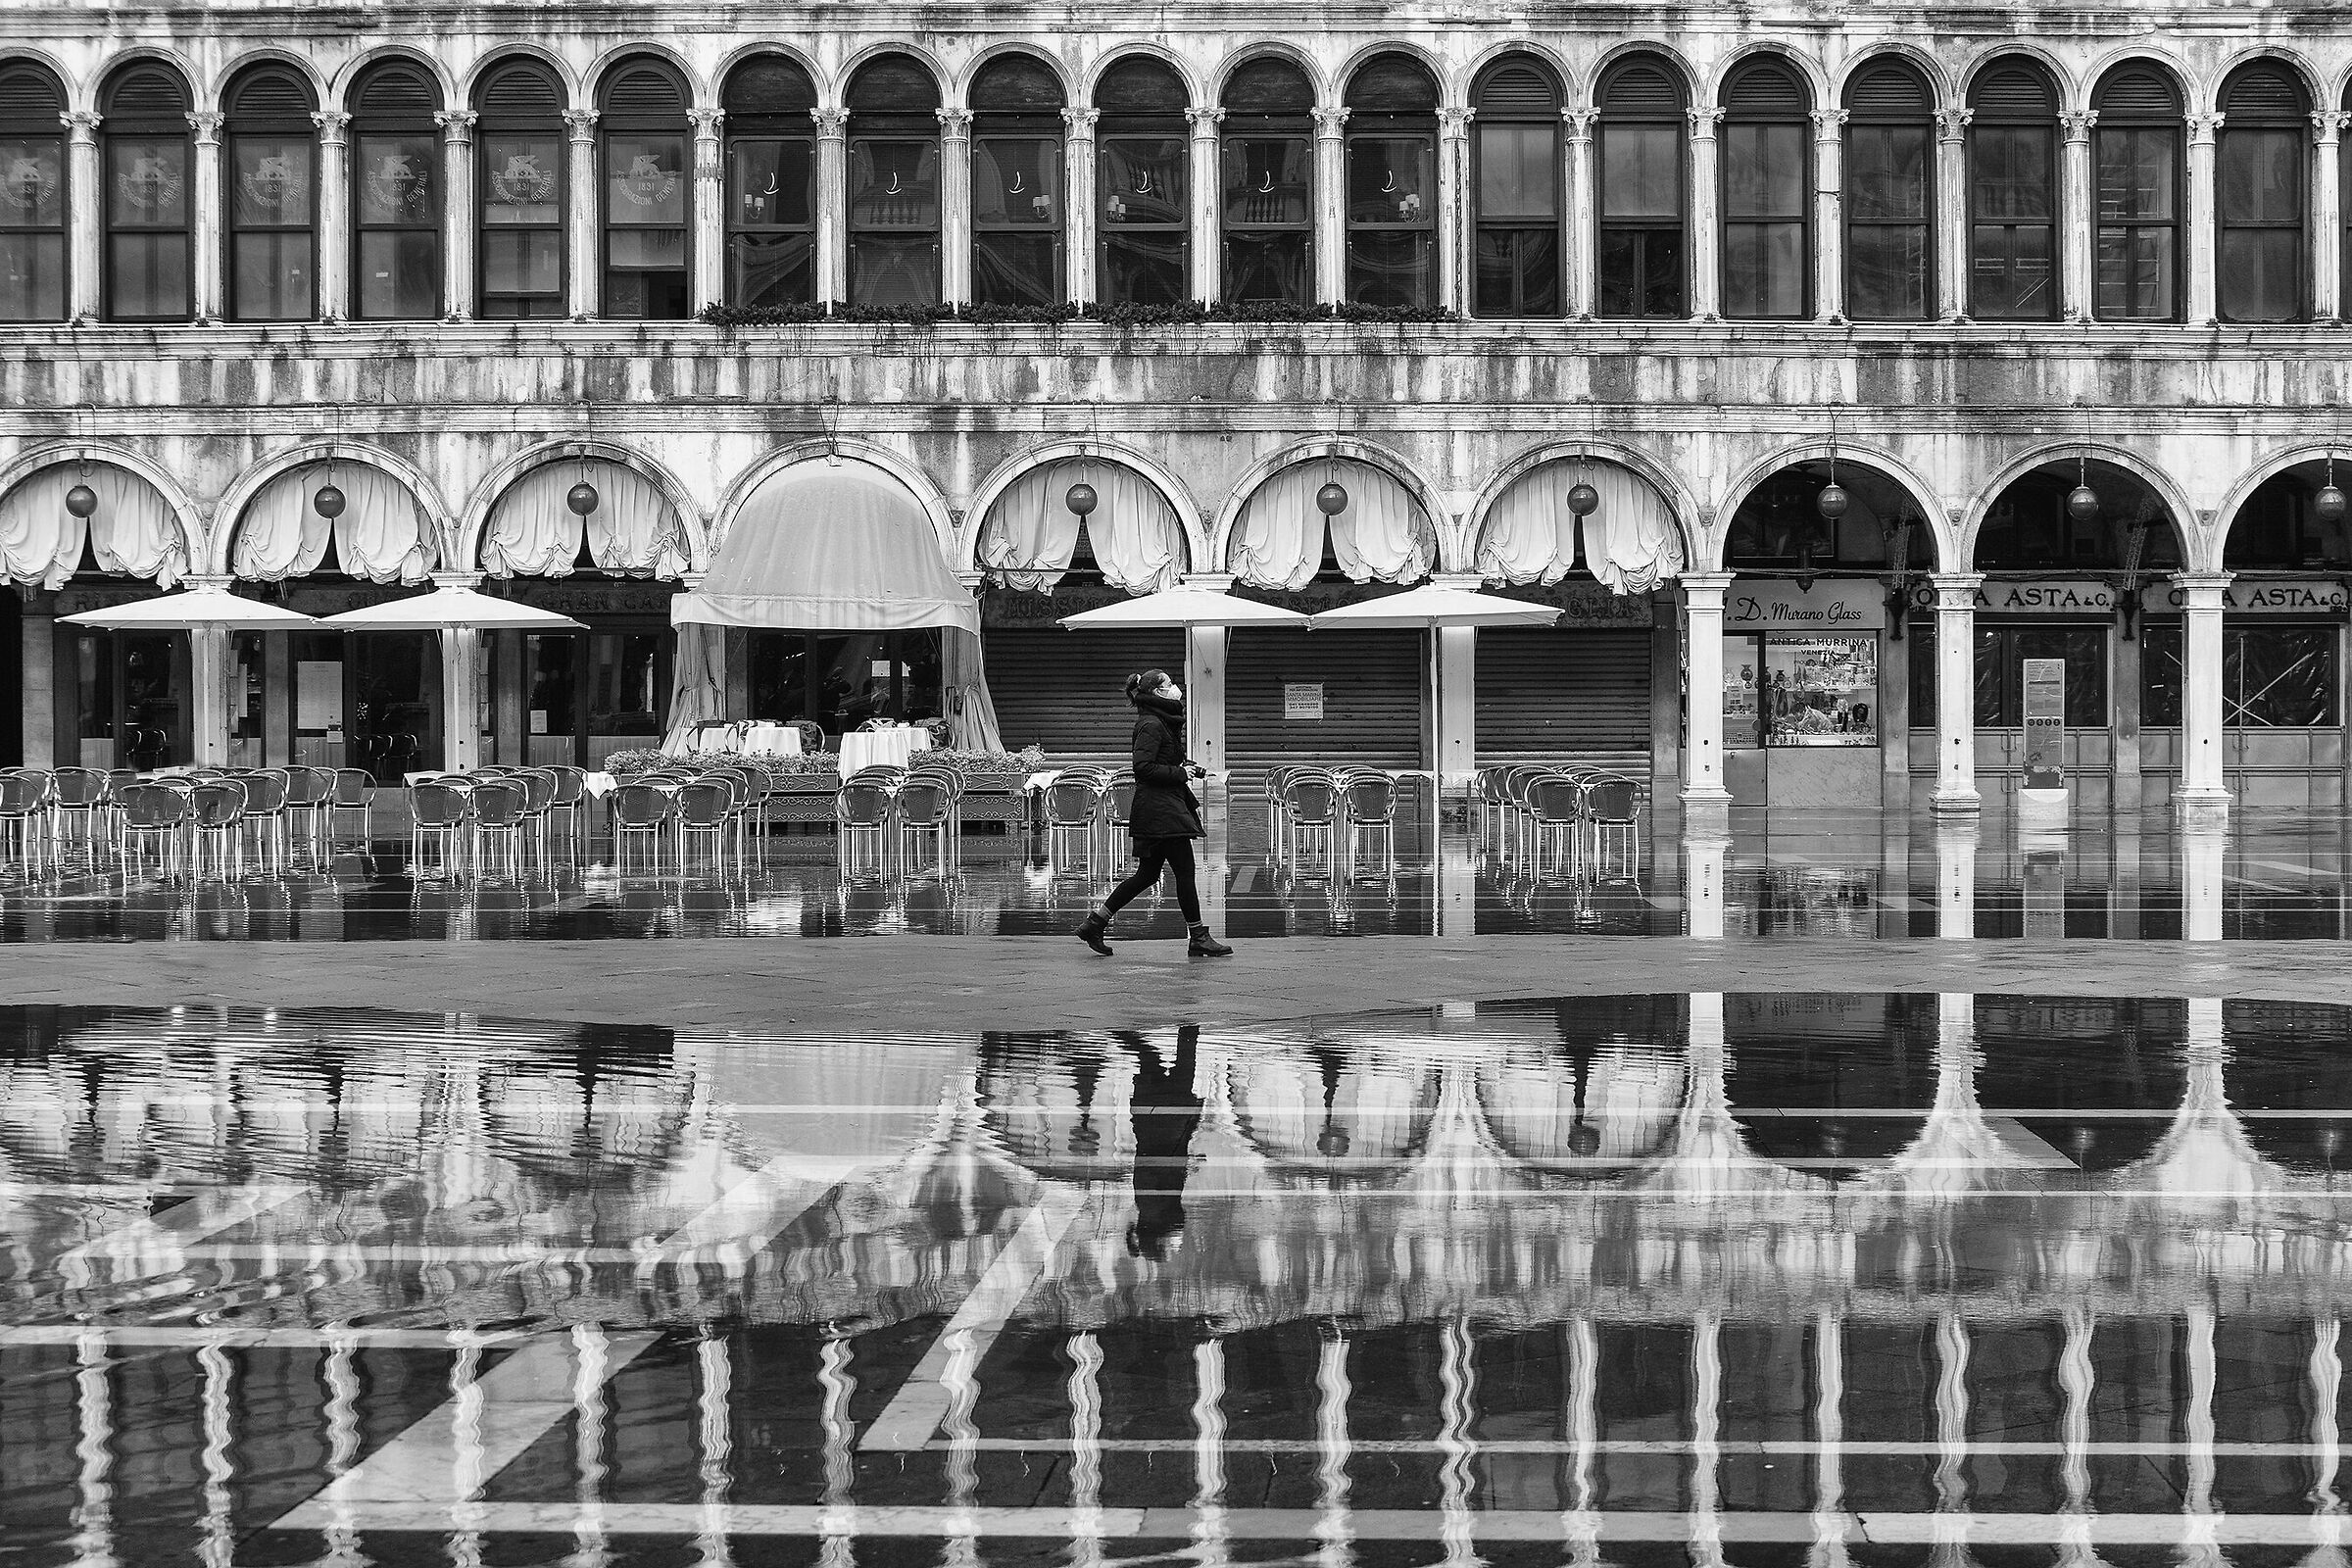 A spasso in piazza San Marco...